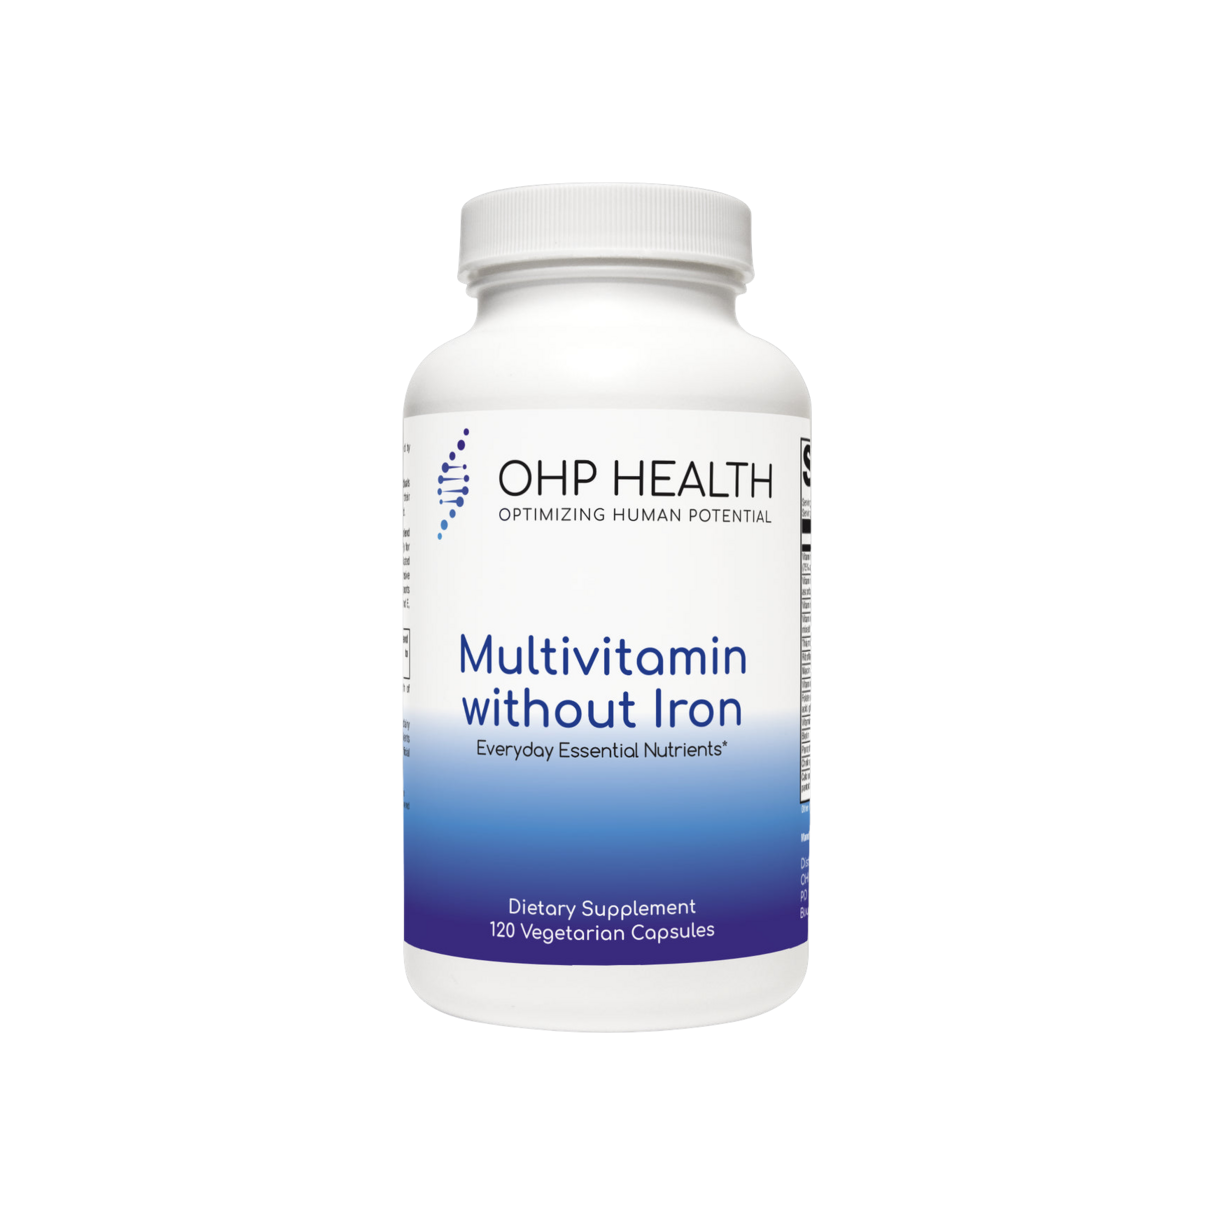 A bottle of Multivitamin Without Iron | 120 count by OHP Health.